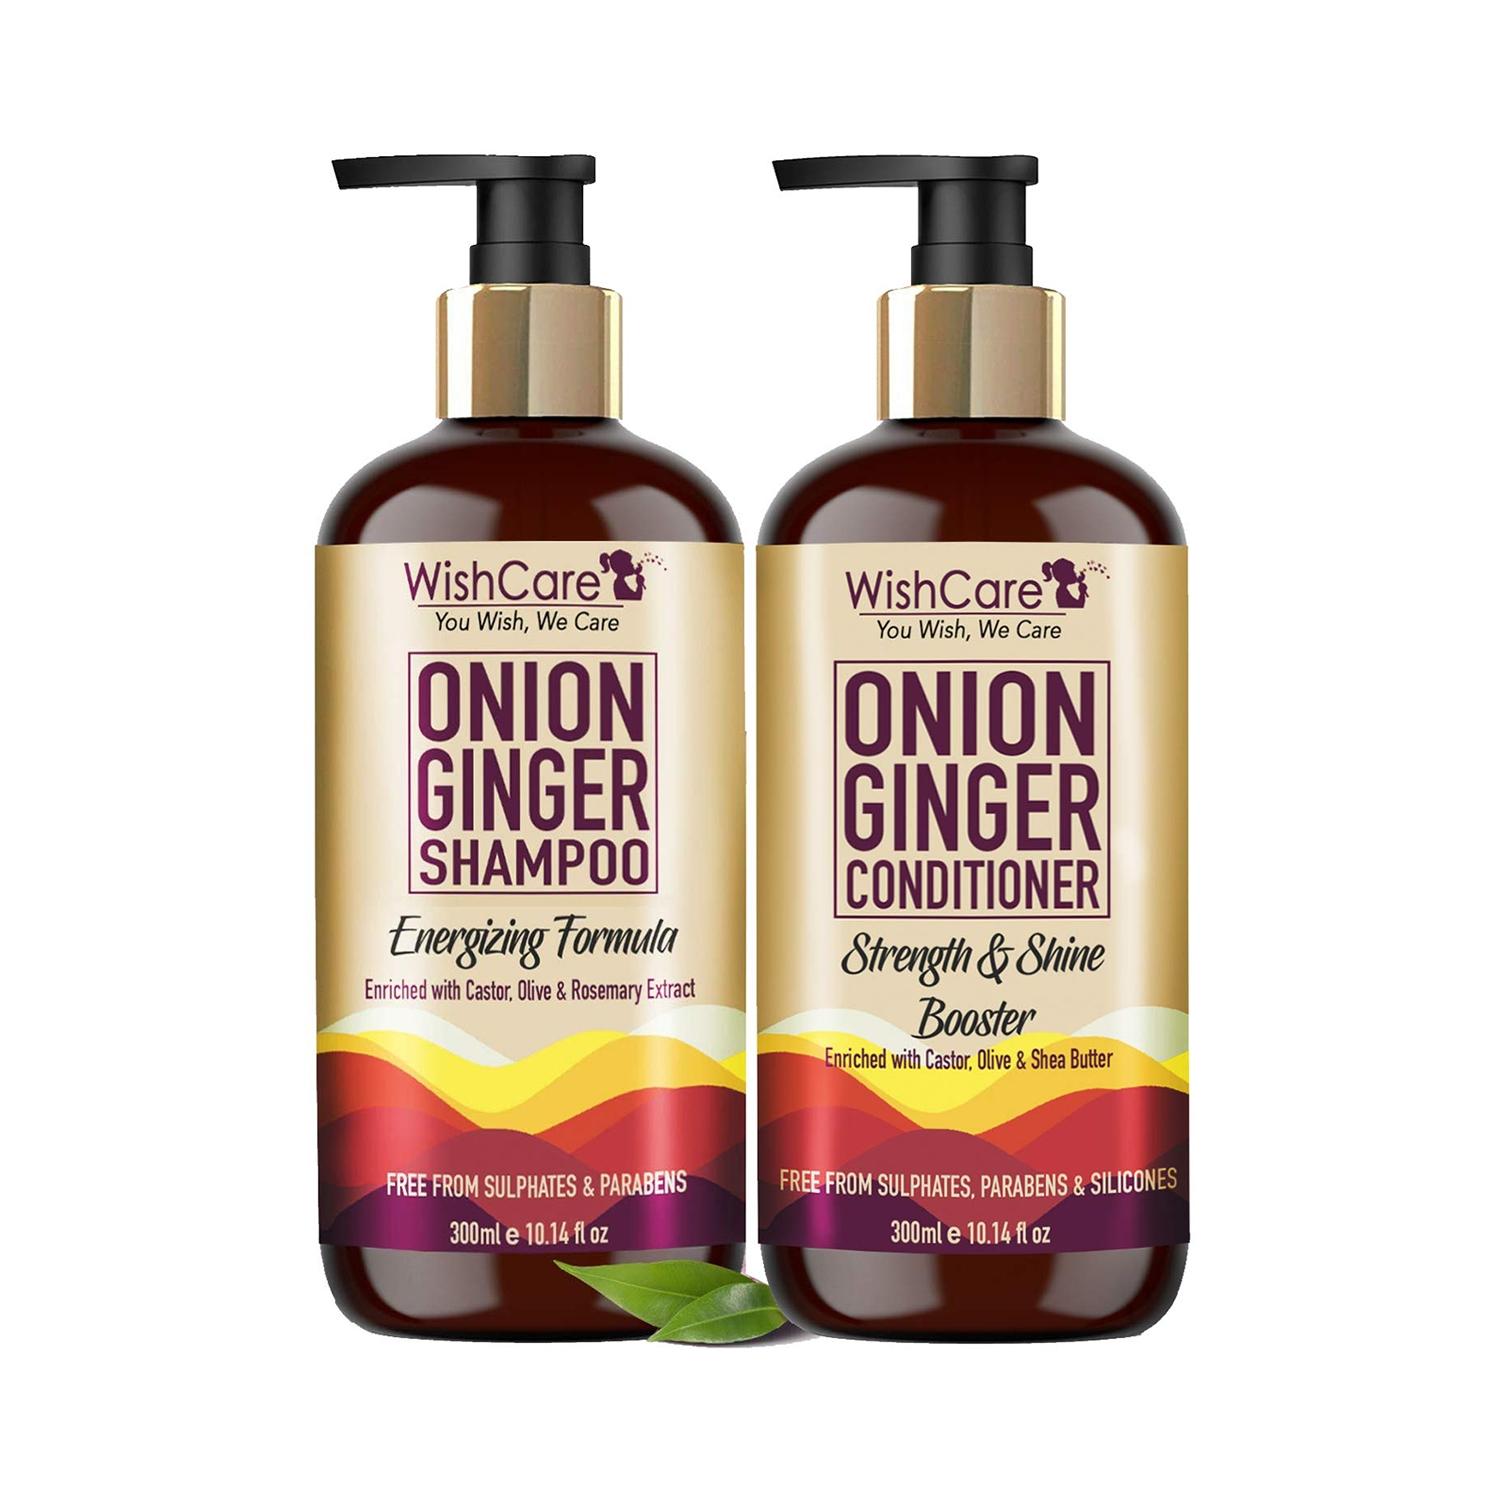 WishCare | WishCare Red Onion Ginger Shampoo & Conditioner Kit (Shampoo and Conditioner combo)